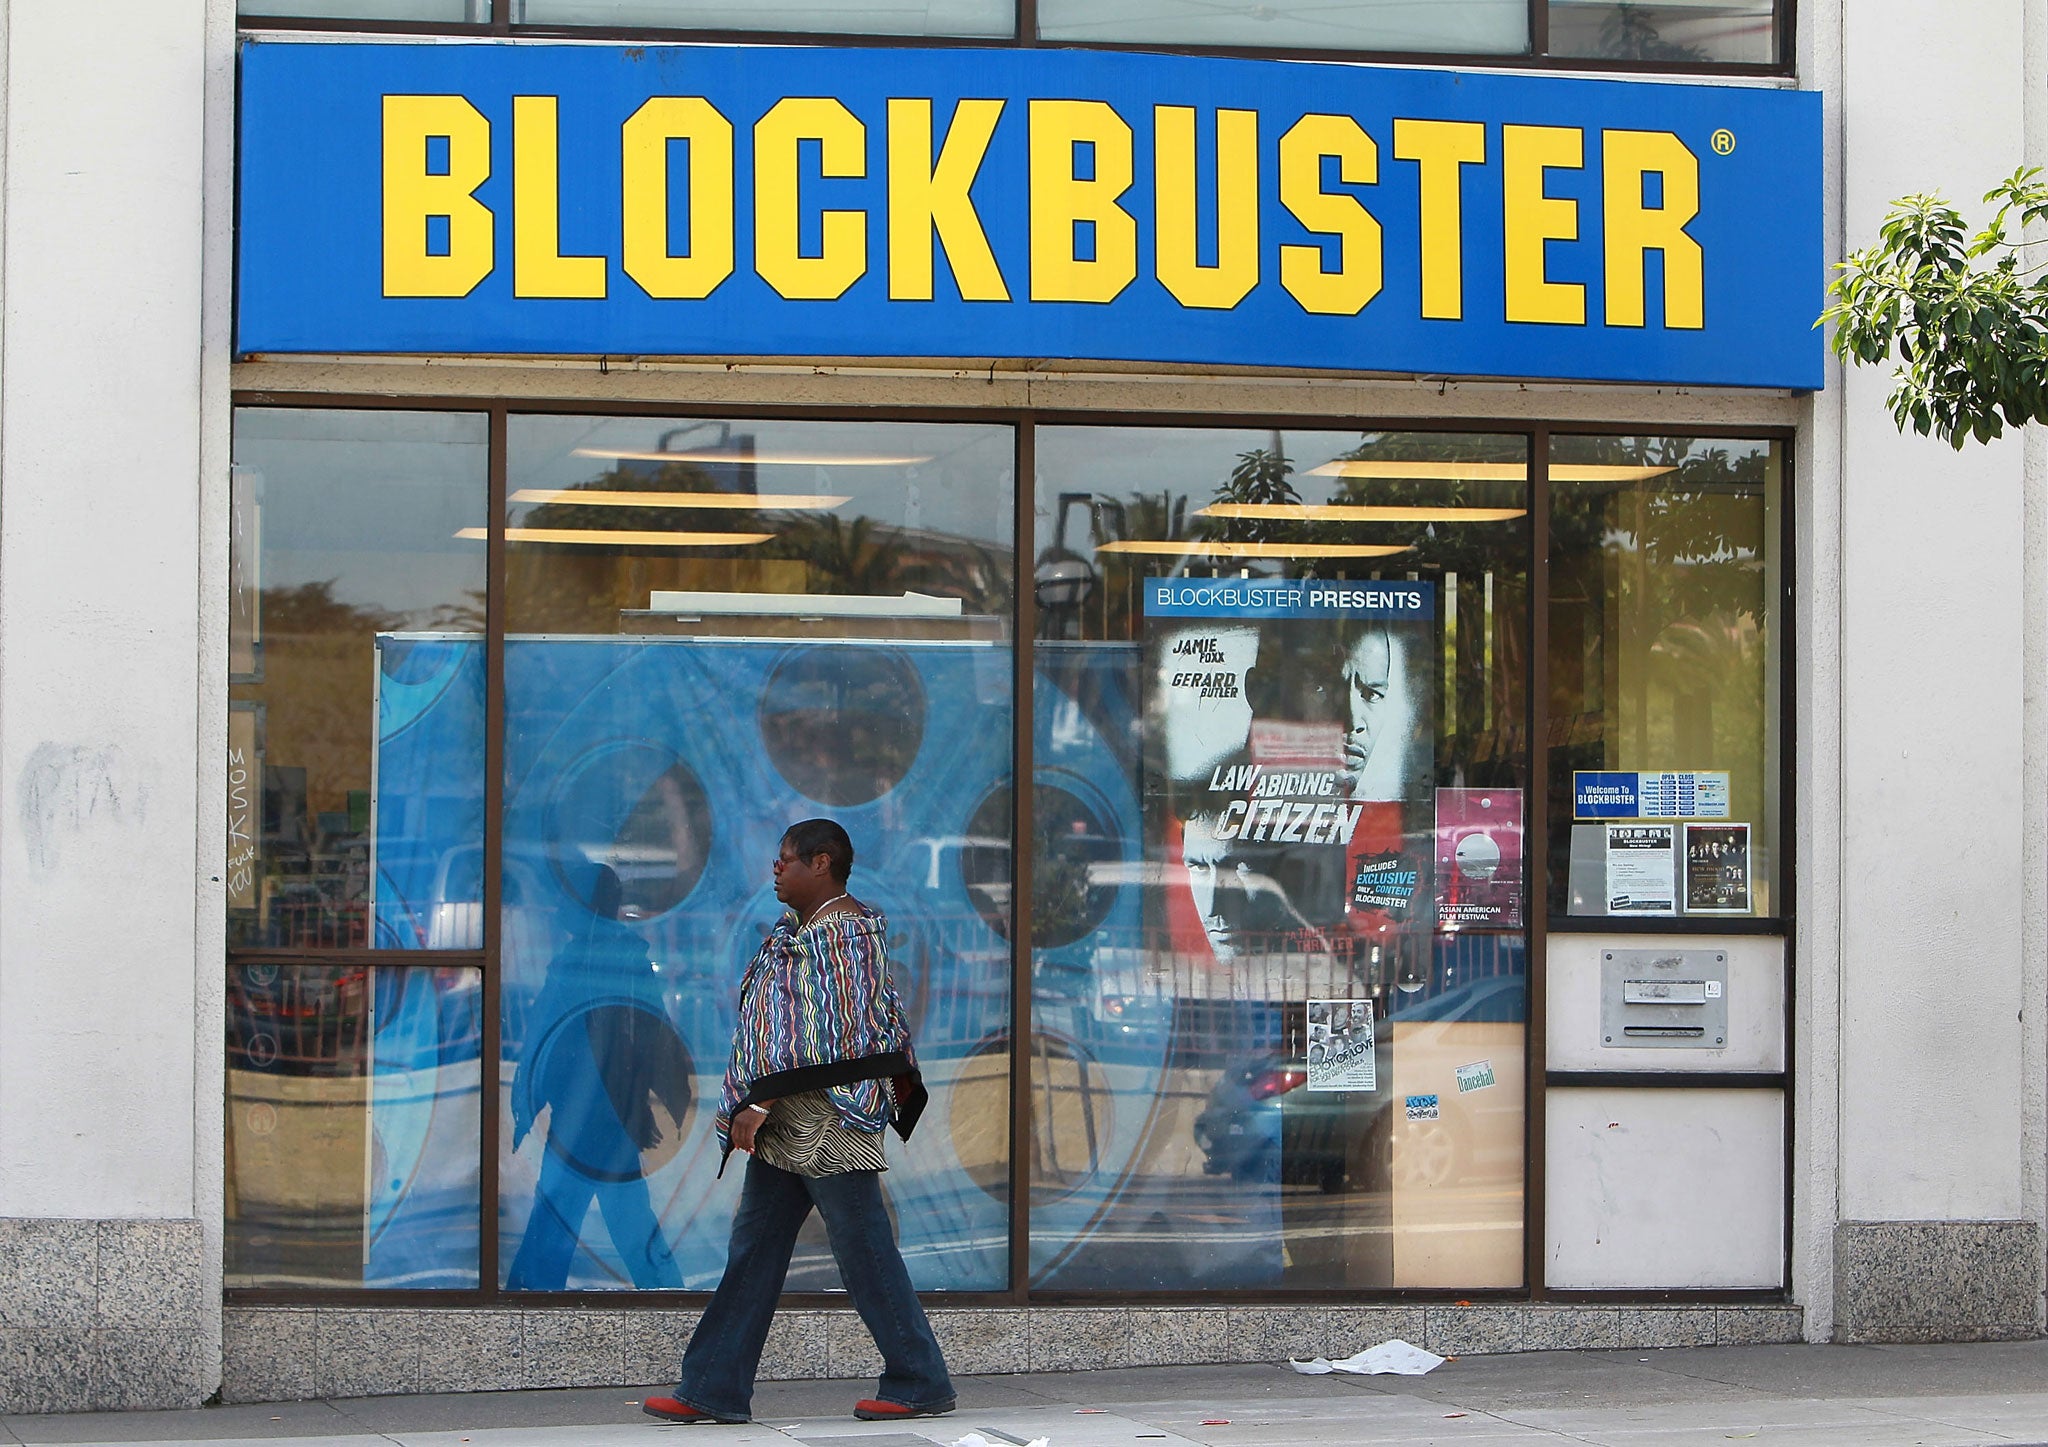 End of the DVD era? Blockbuster announces it will shut down all remaining stores within days